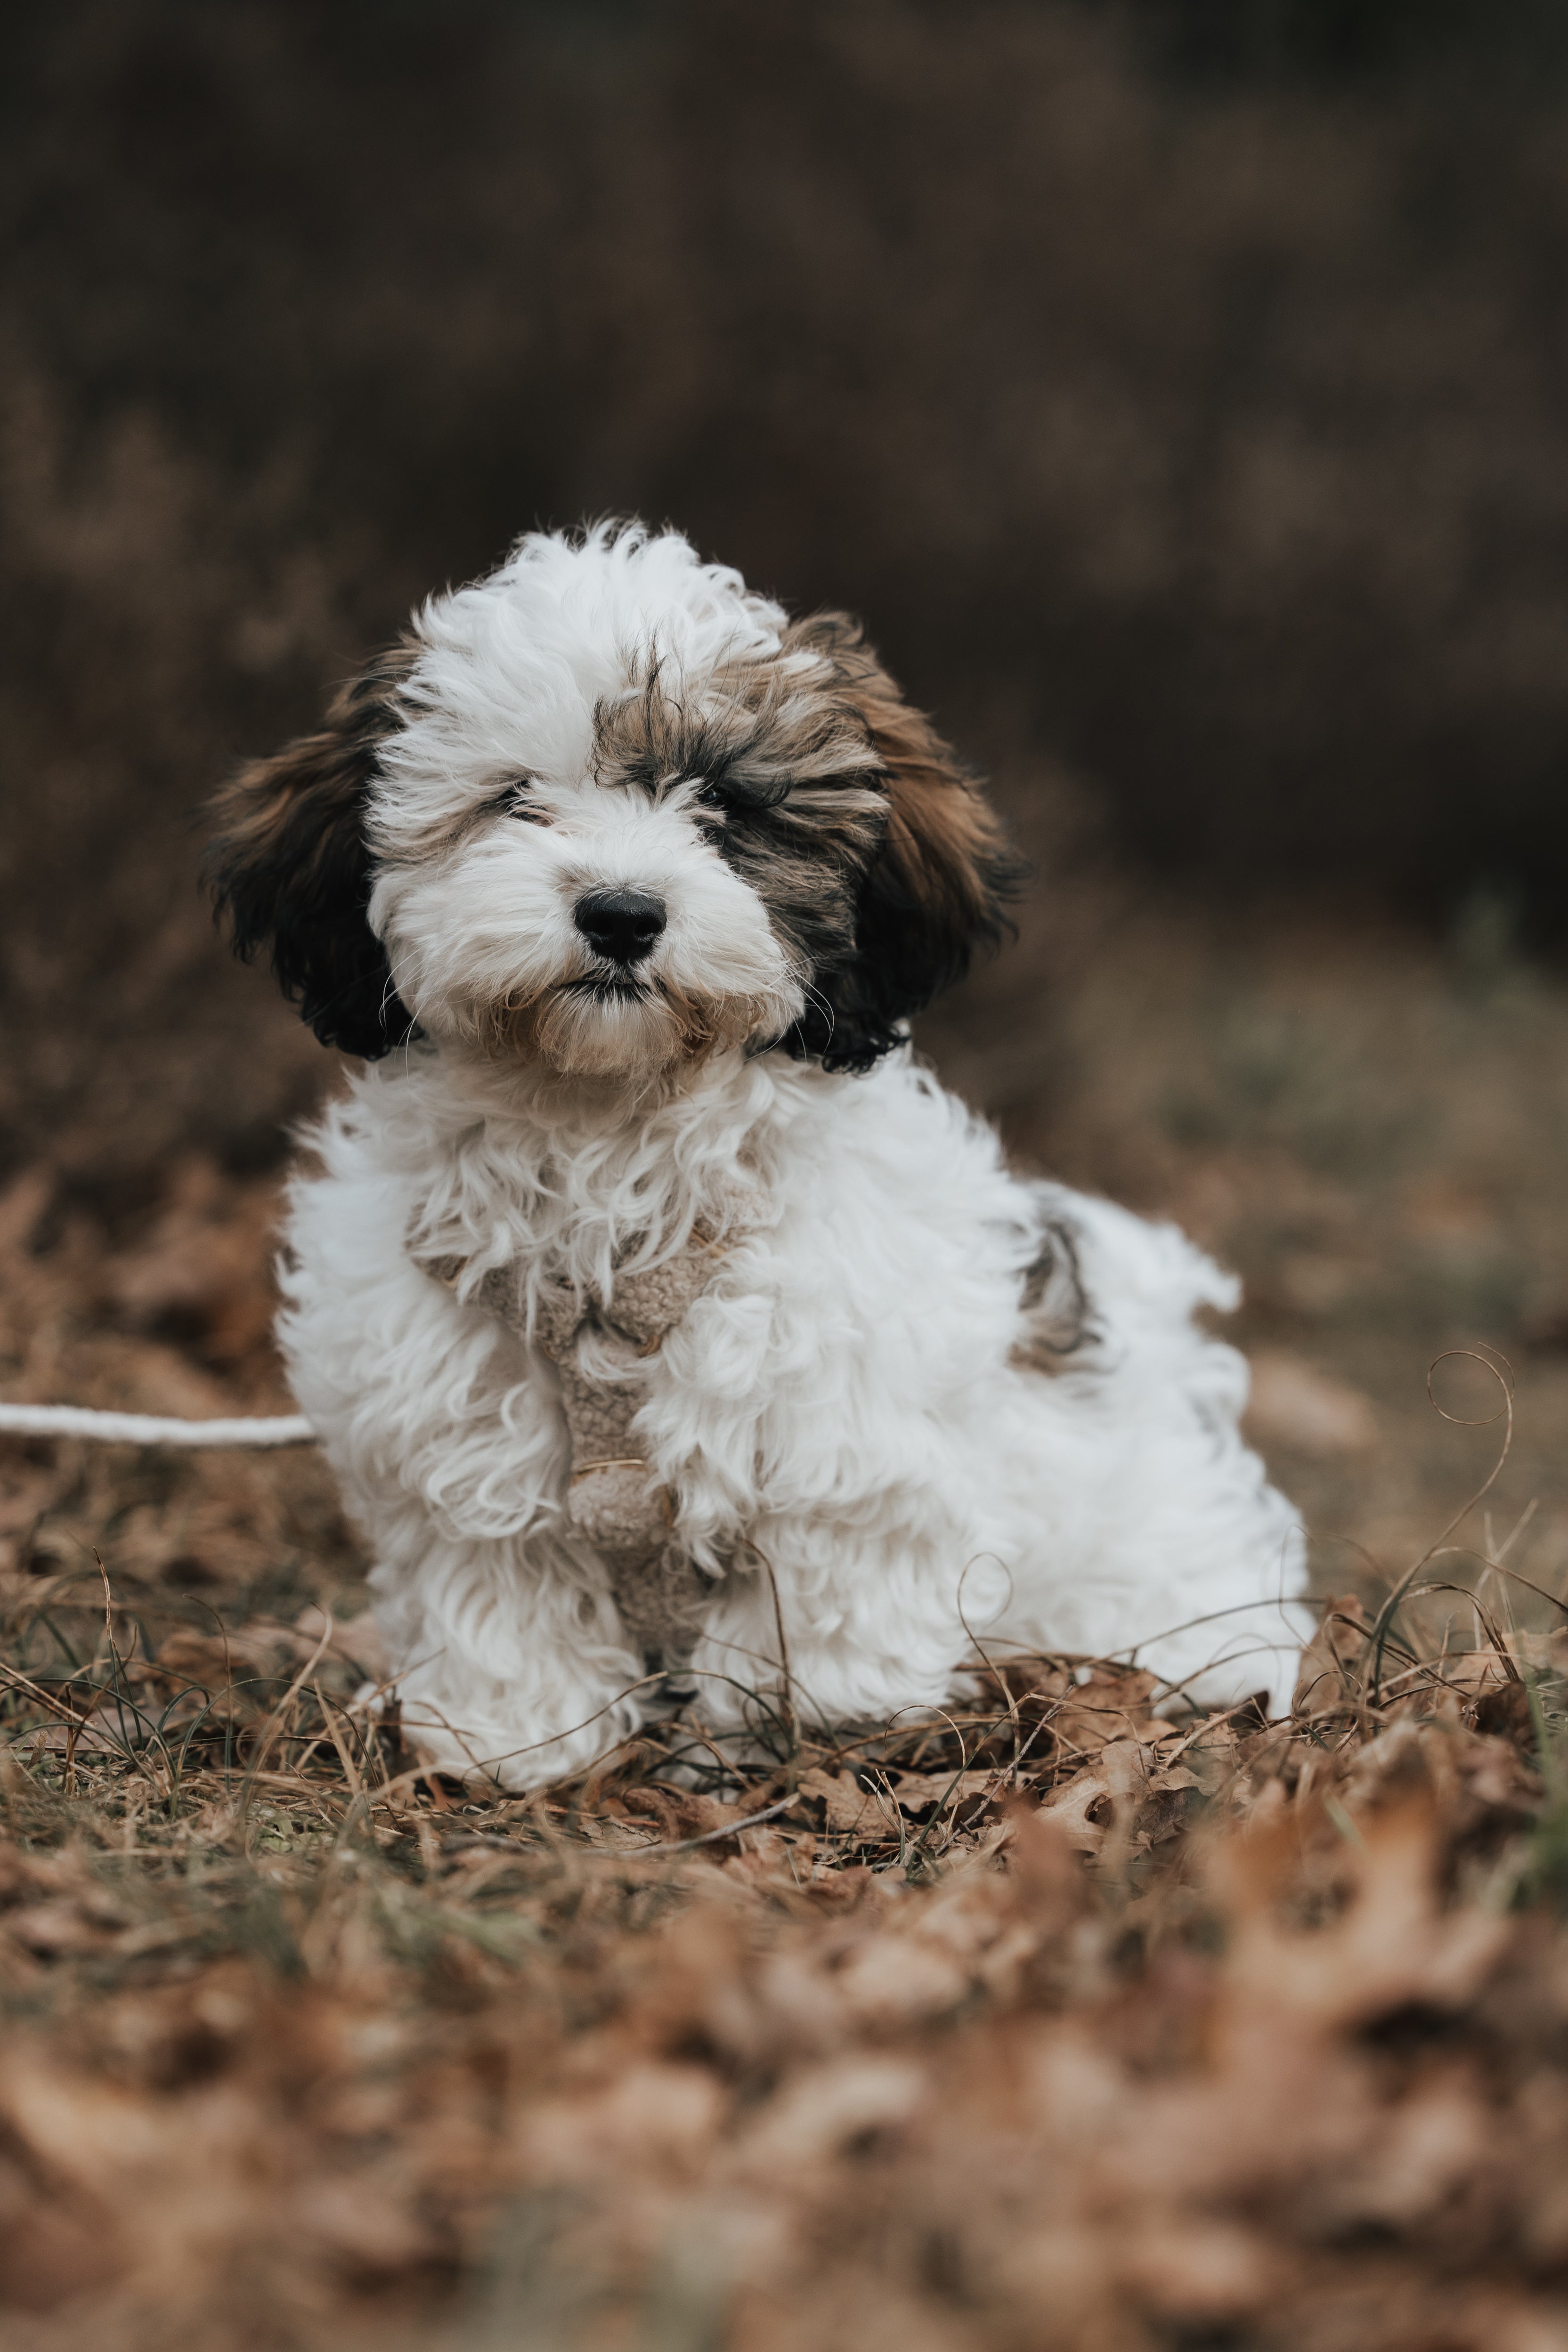 Building Up Walks with Your New Puppy: A Step-by-Step Guide